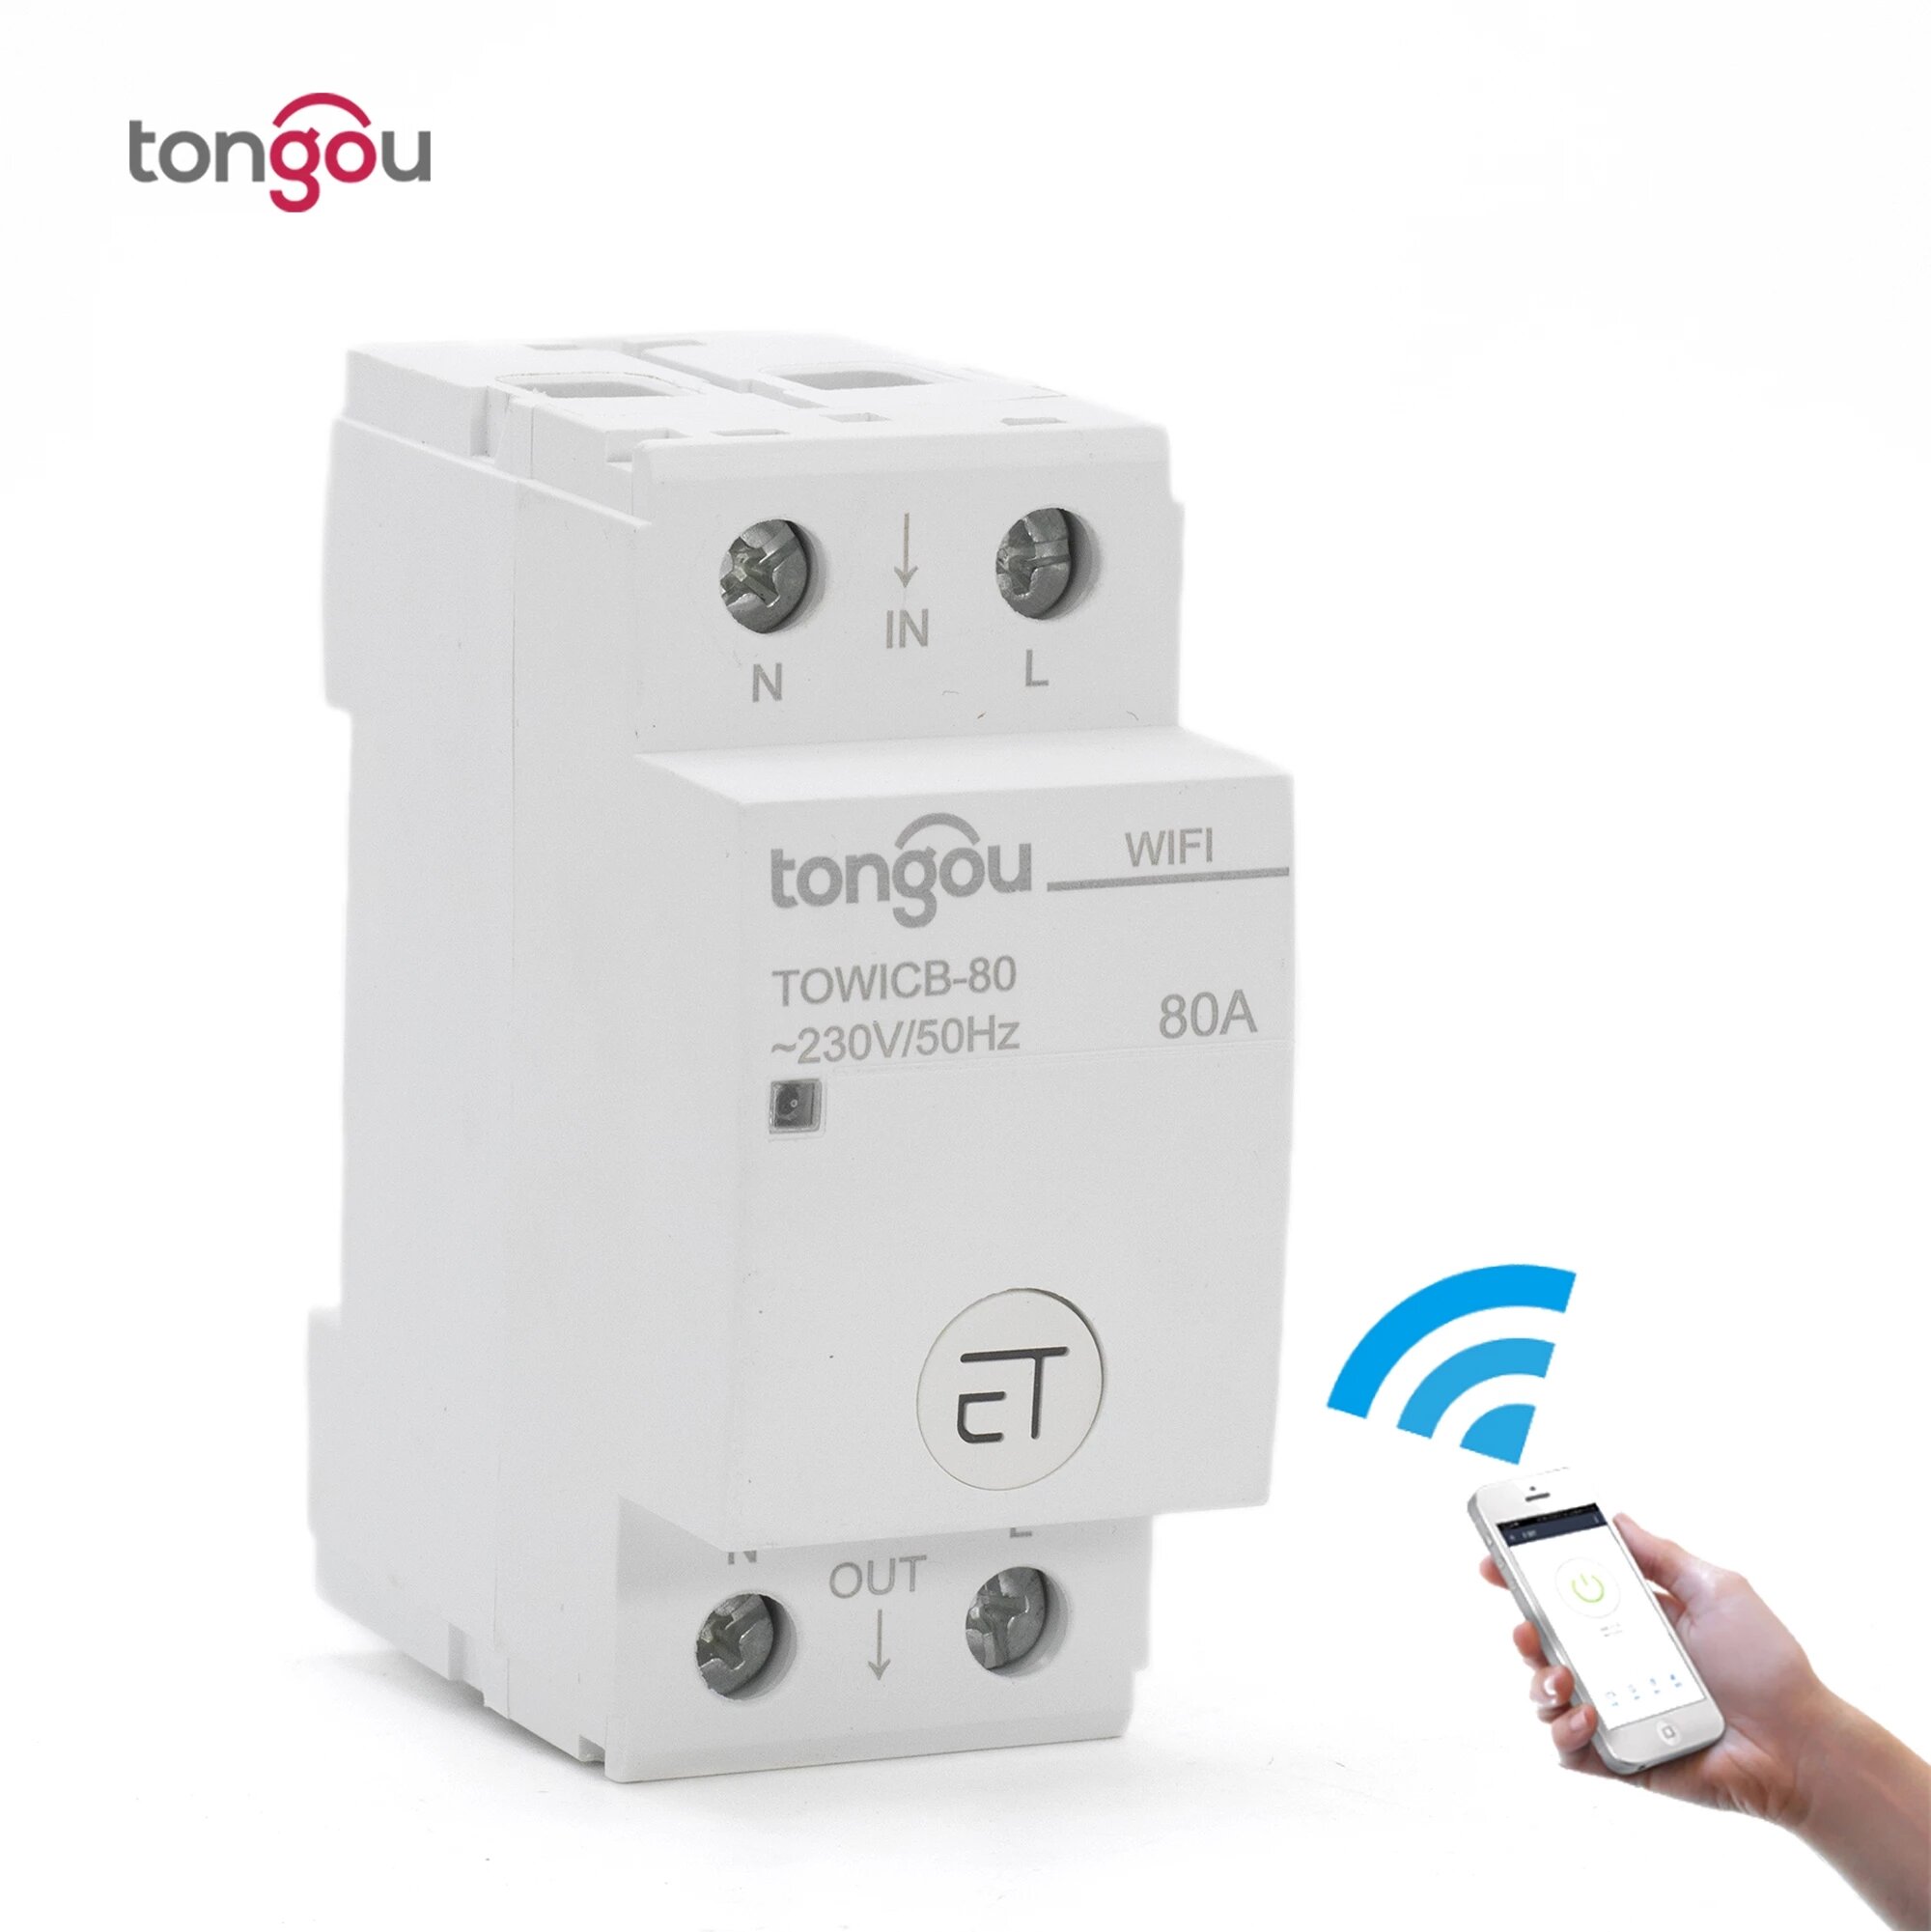 

Tongou TOWICB-80 2P WiFi Circuit Breaker Remote Control by eWeLink APP Voice Control With Amazon Alexa Google Home 36mm